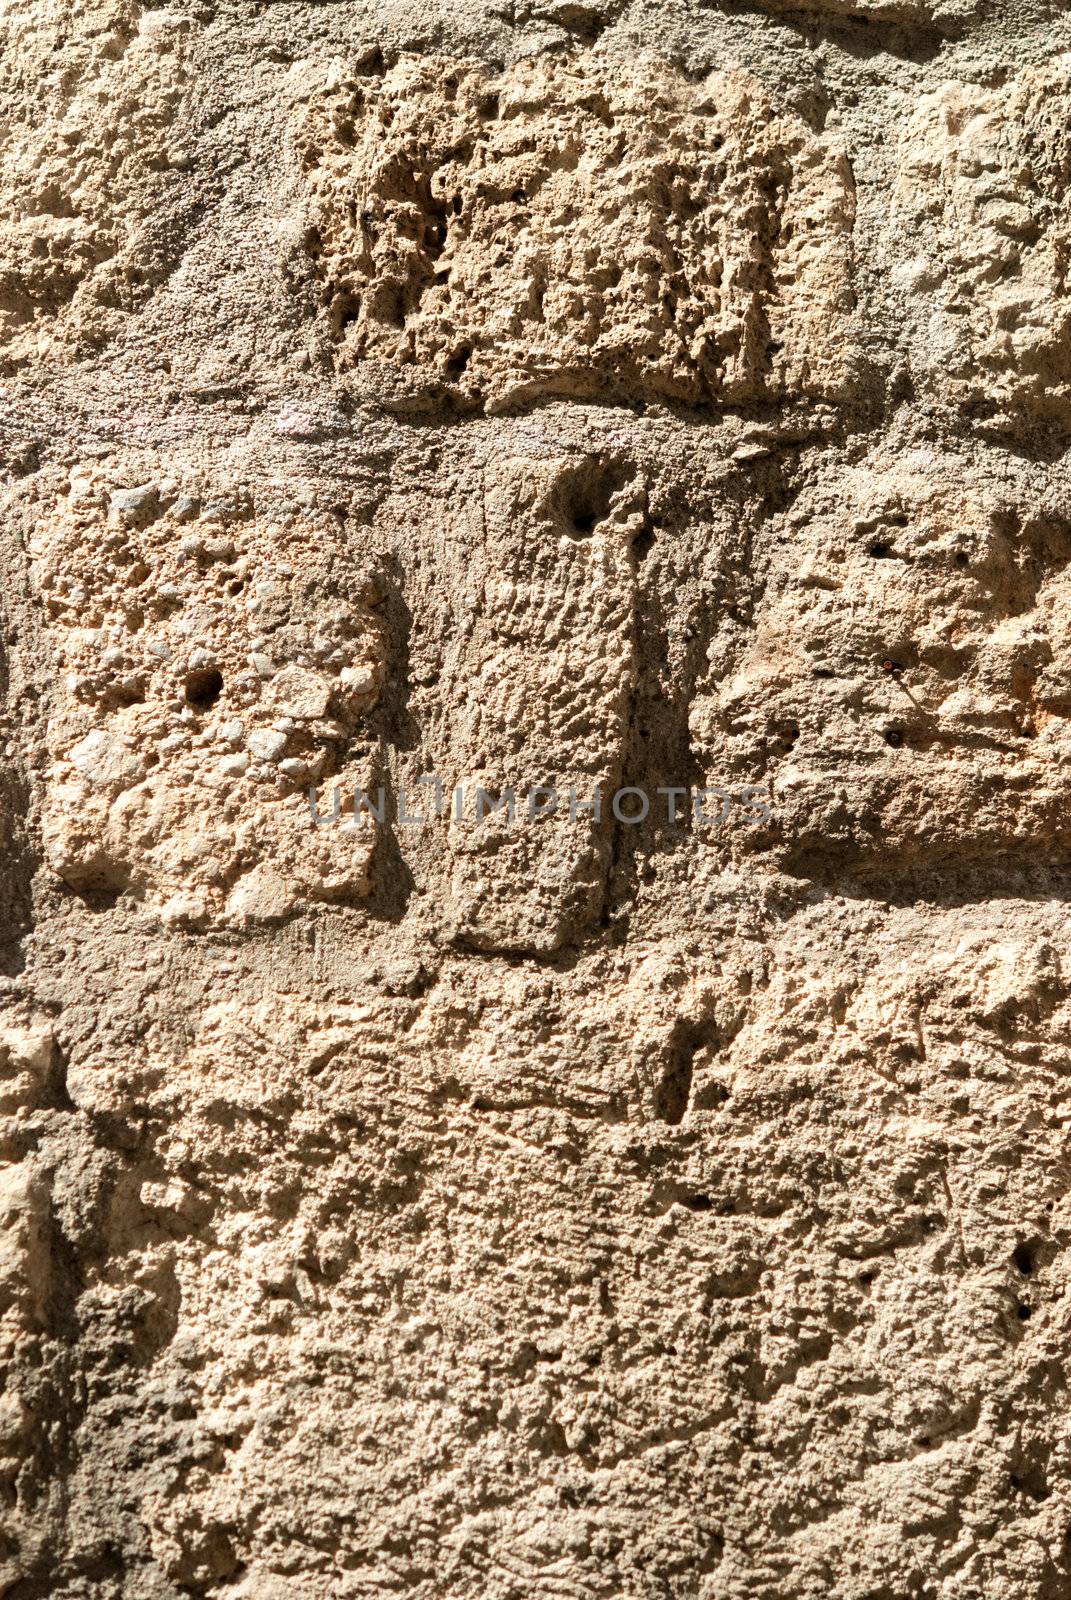 Surface of ancient textured stonework background. Brown tint